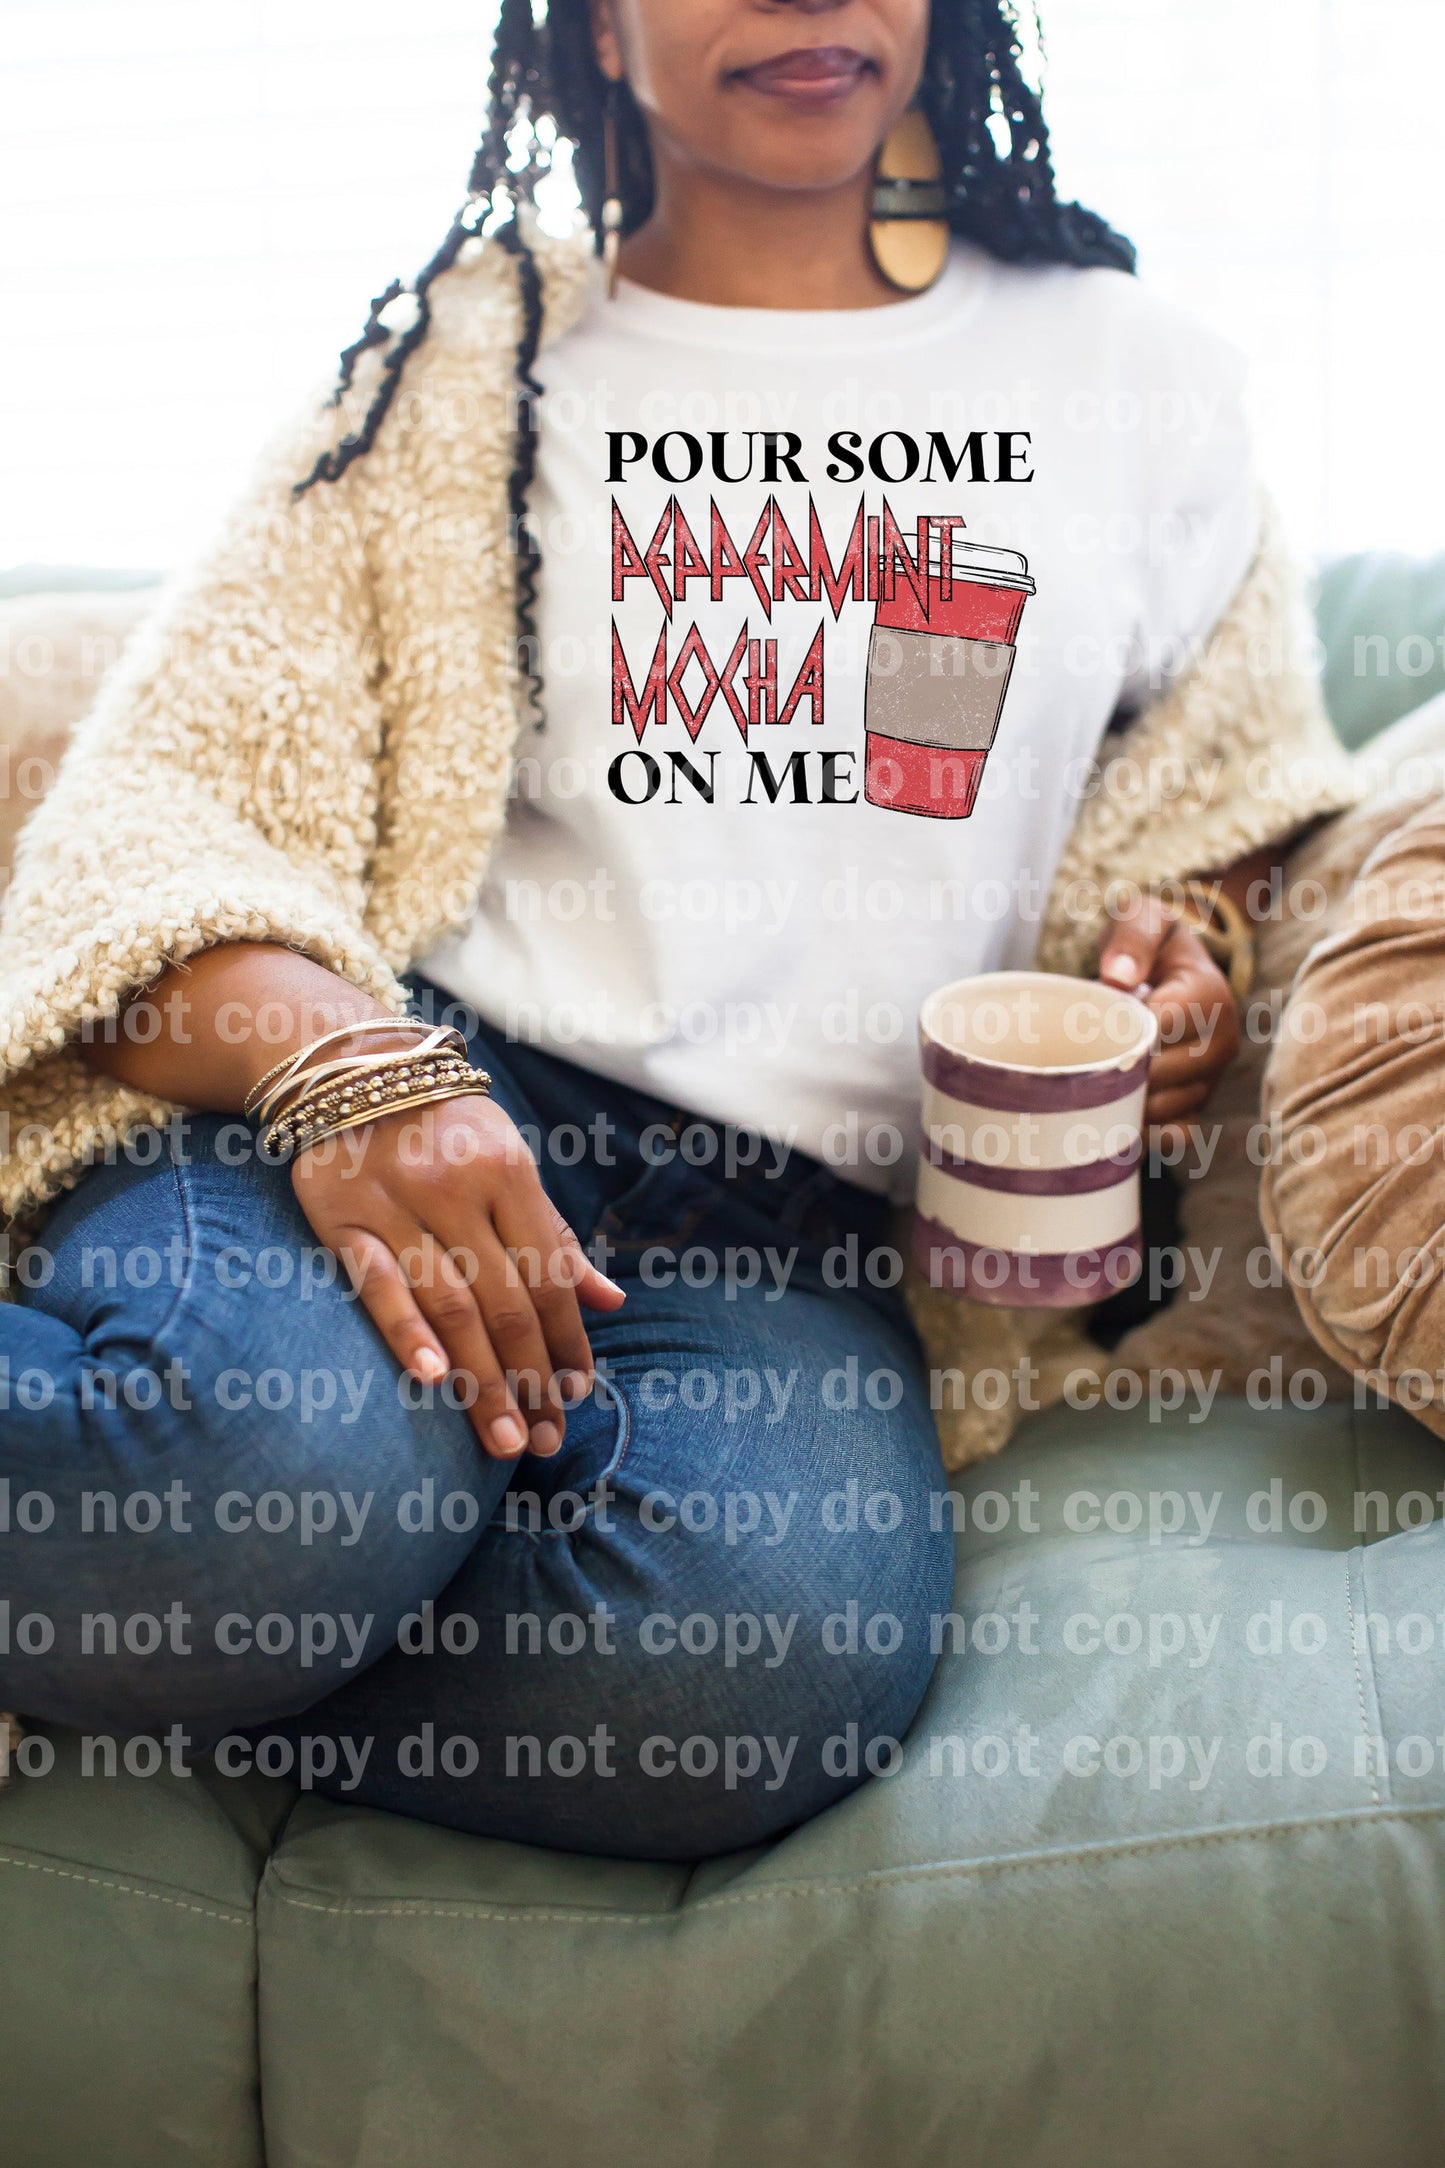 Pour Some Peppermint Mocha On Me Full Color/One Color Dream Print or Sublimation Print